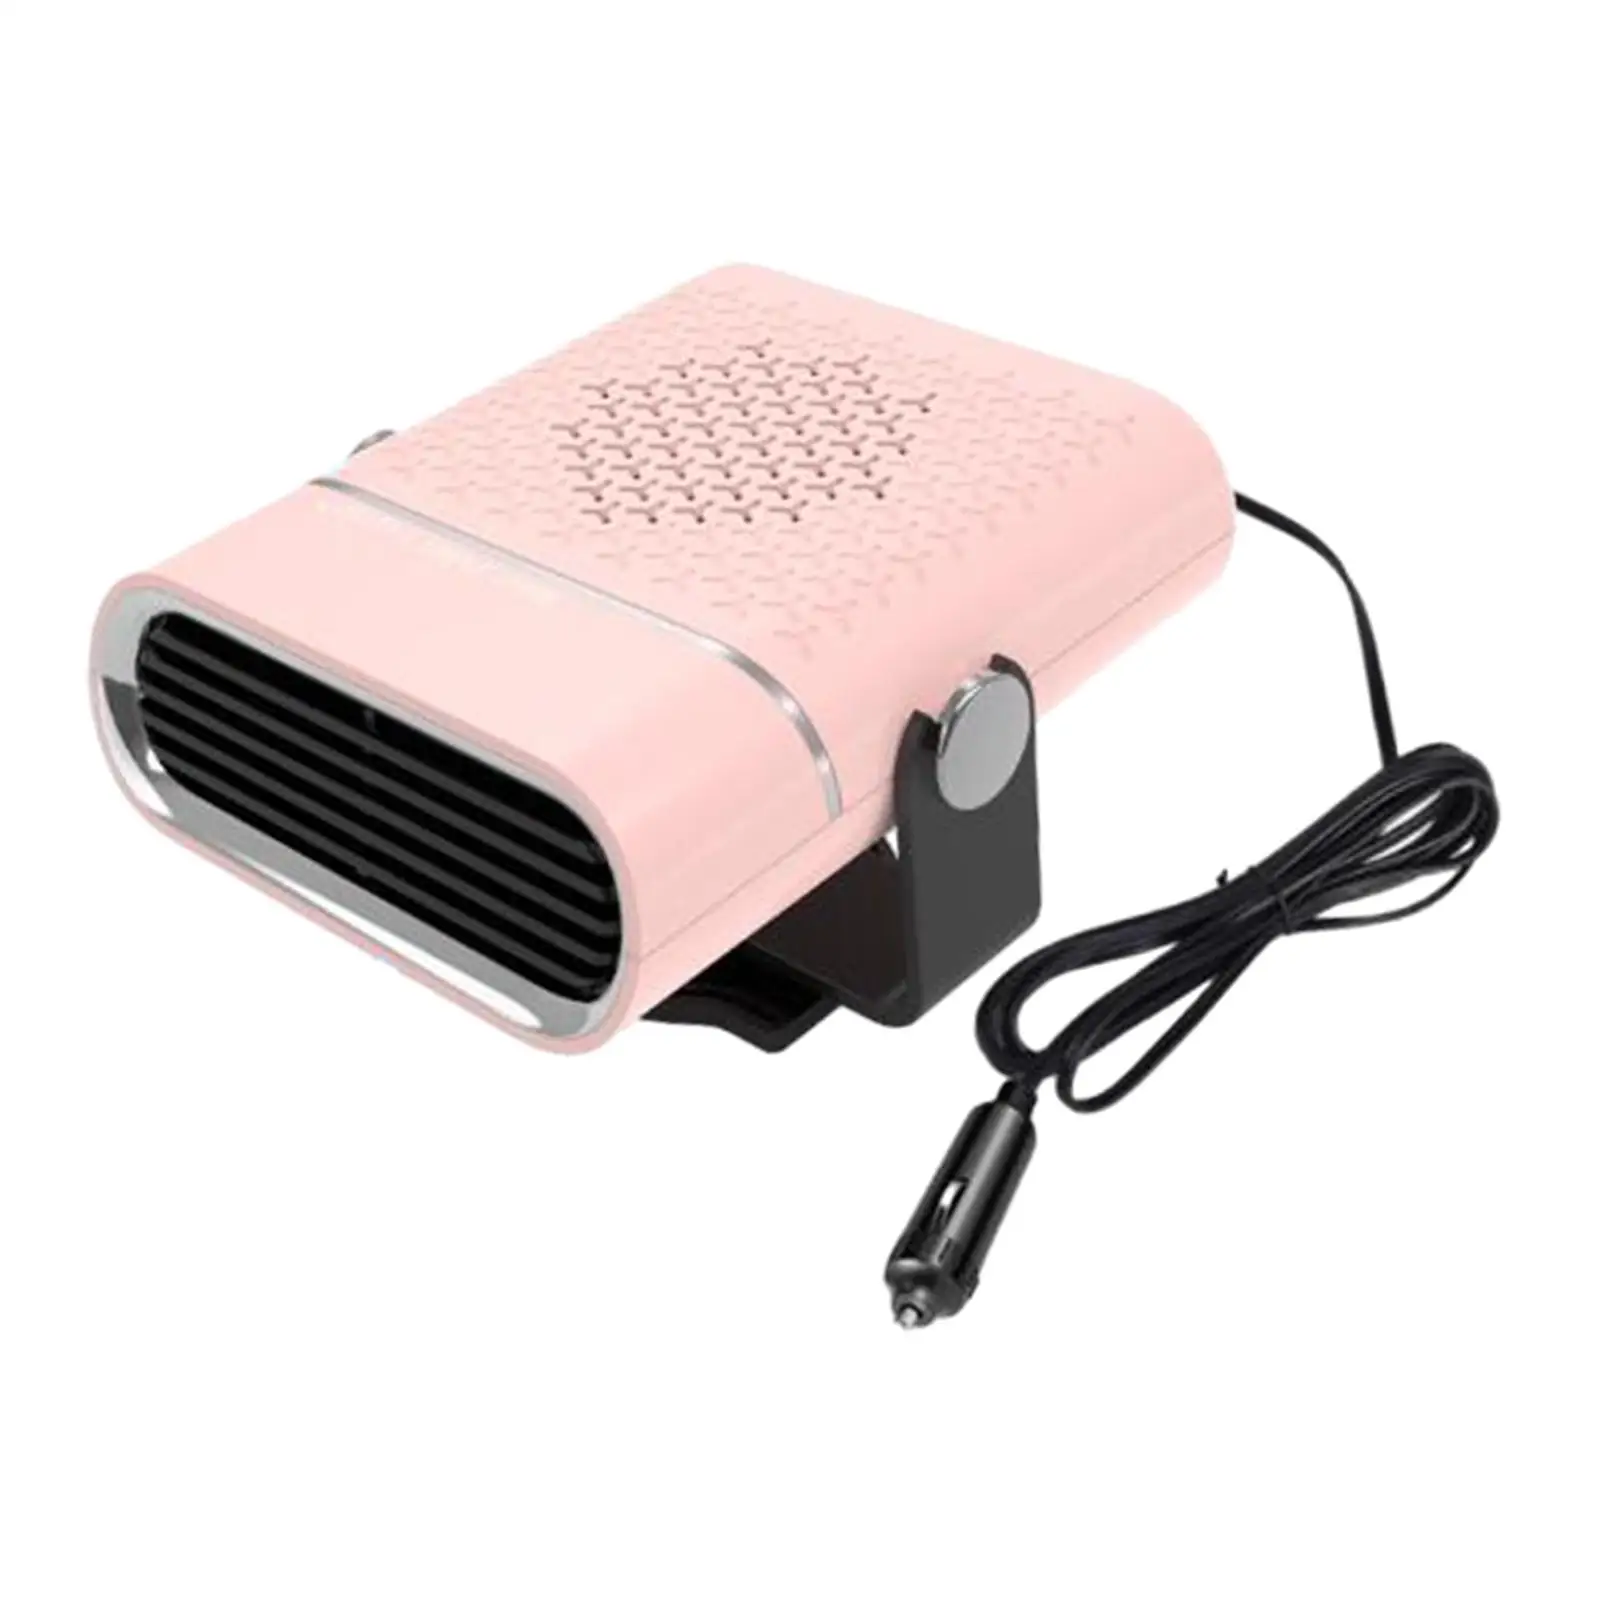 

Car Heater 24V Compact Fast Heating Defrost Defogger with Lighter Plug 360 Degree Rotary Automobile Windscreen Car Fan